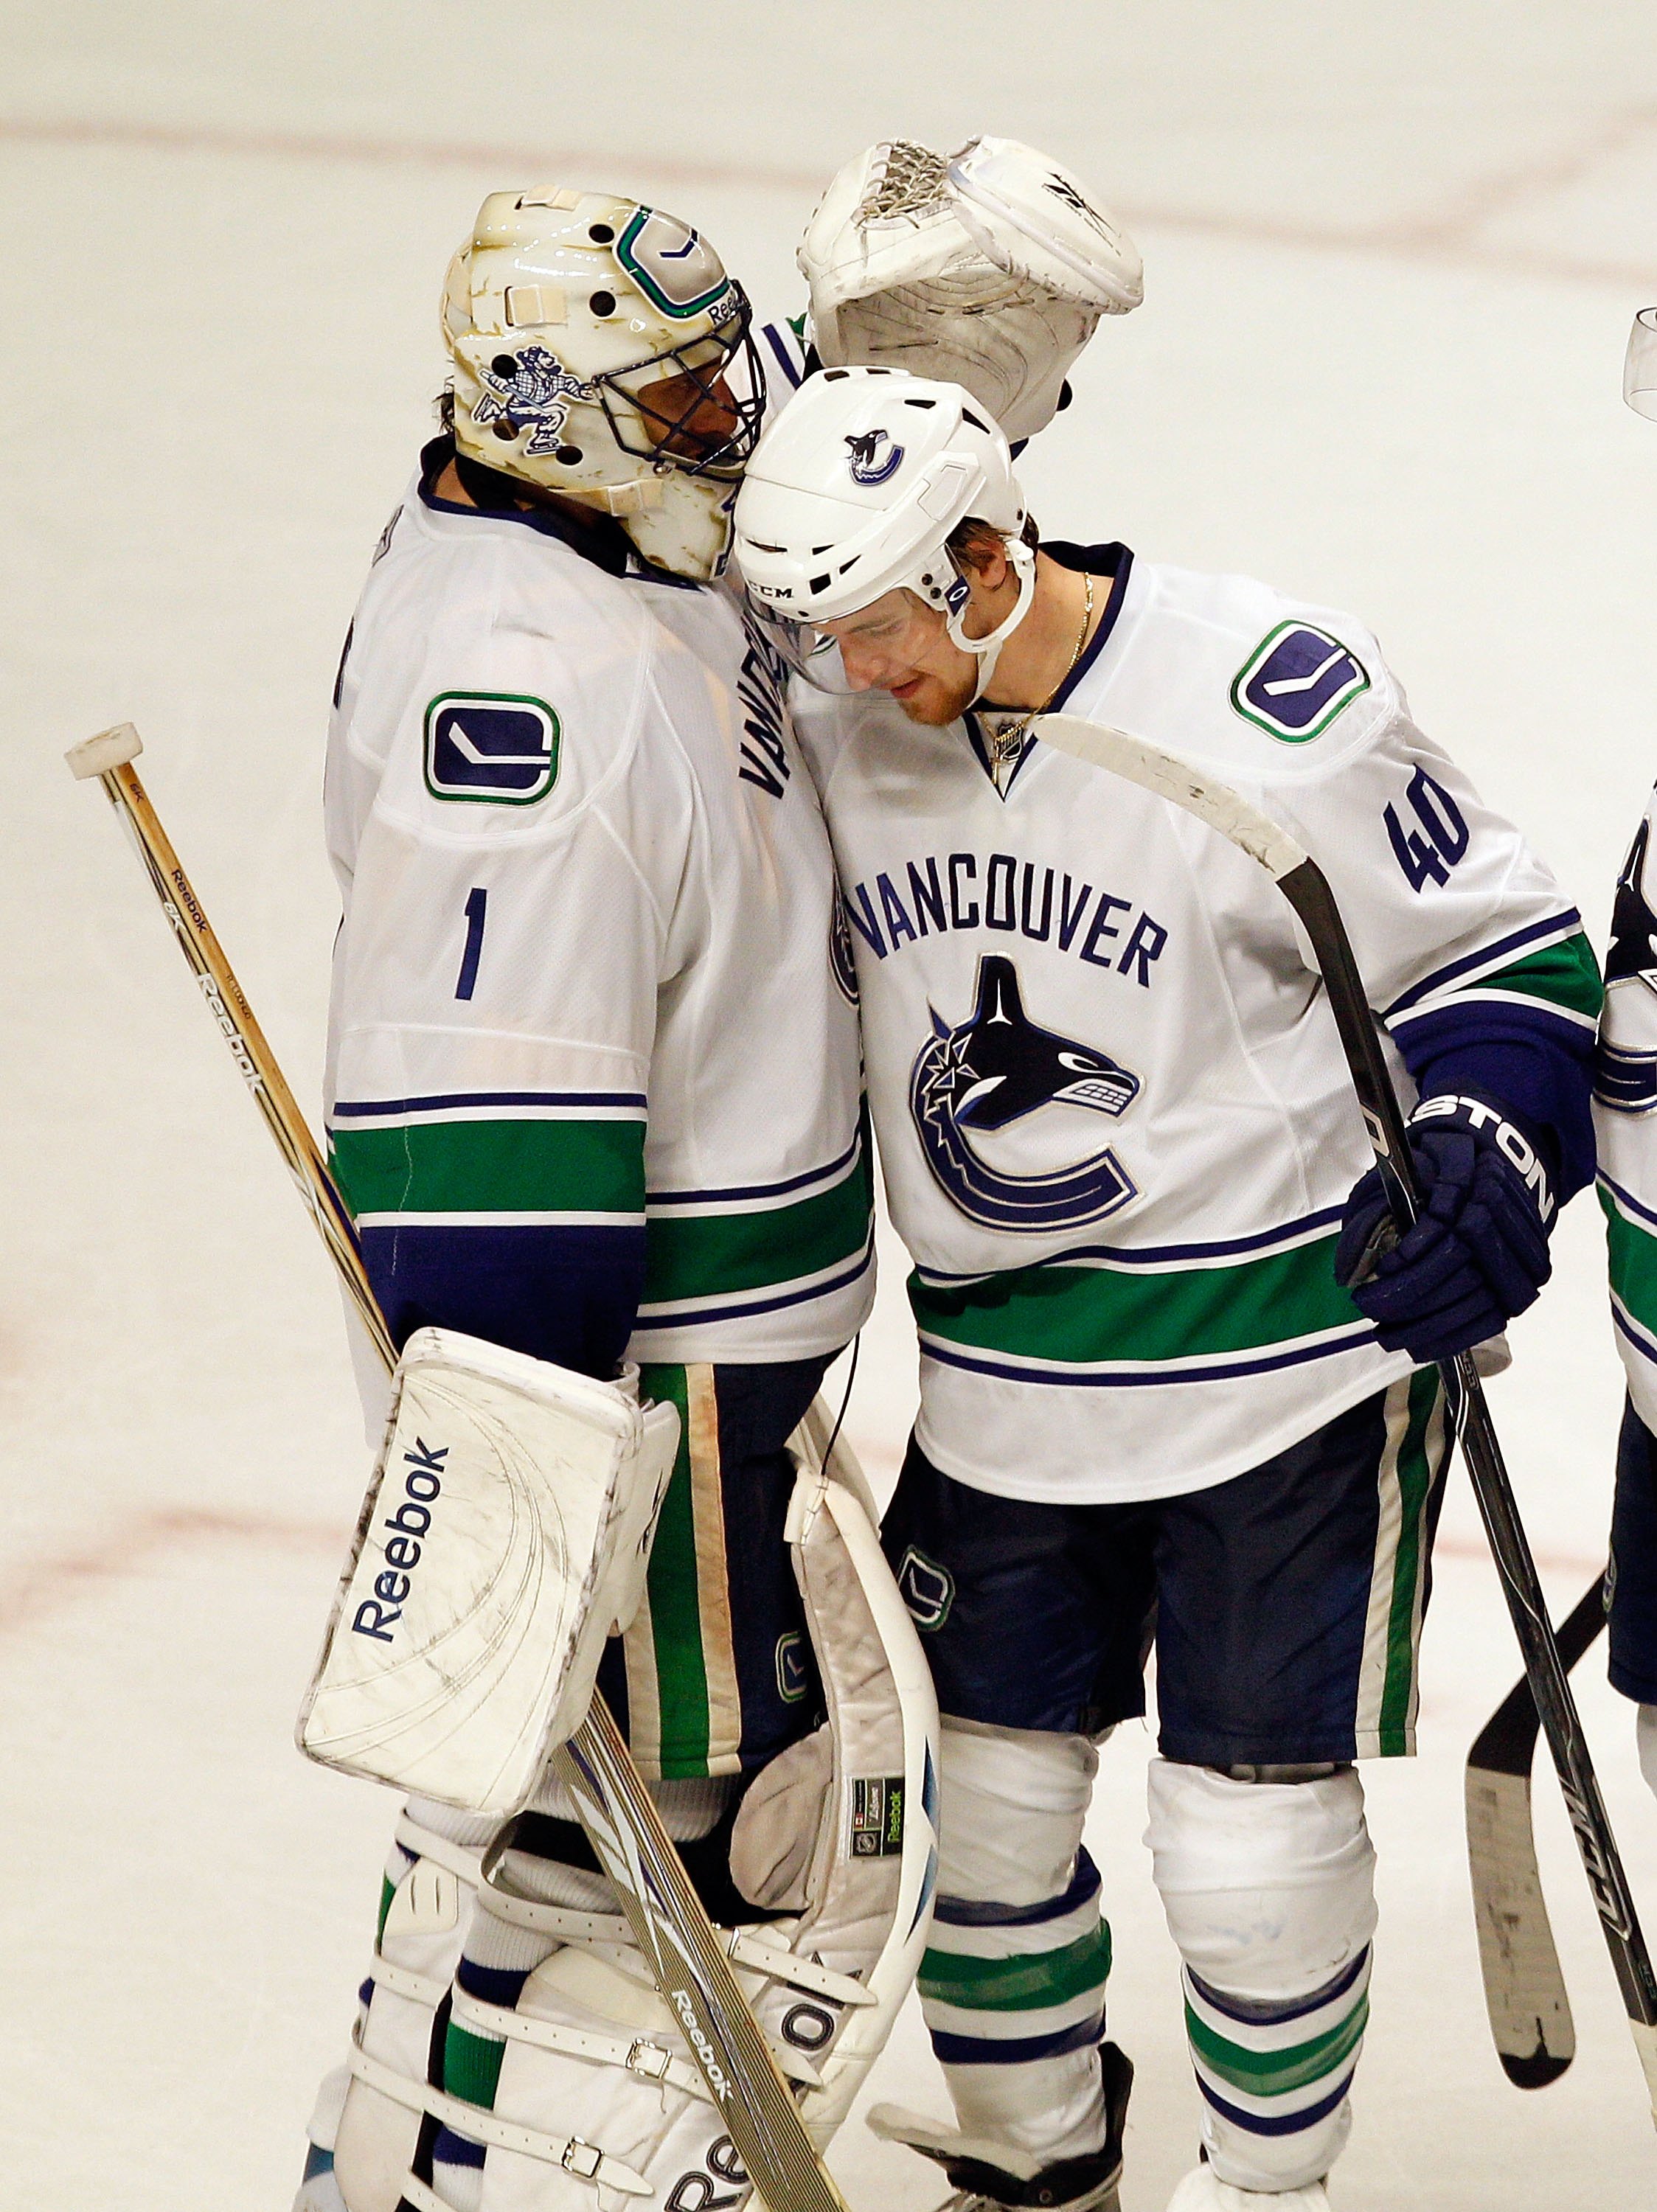 CHICAGO - MAY 09: Roberto Luongo #1 of the Vancouver Canucks is congratulated by Michael Grabner #40 after a win over the Chicago Blackhawks in Game Five of the Western Conference Semifinals during the 2010 NHL Stanley Cup Playoffs at United Center on May